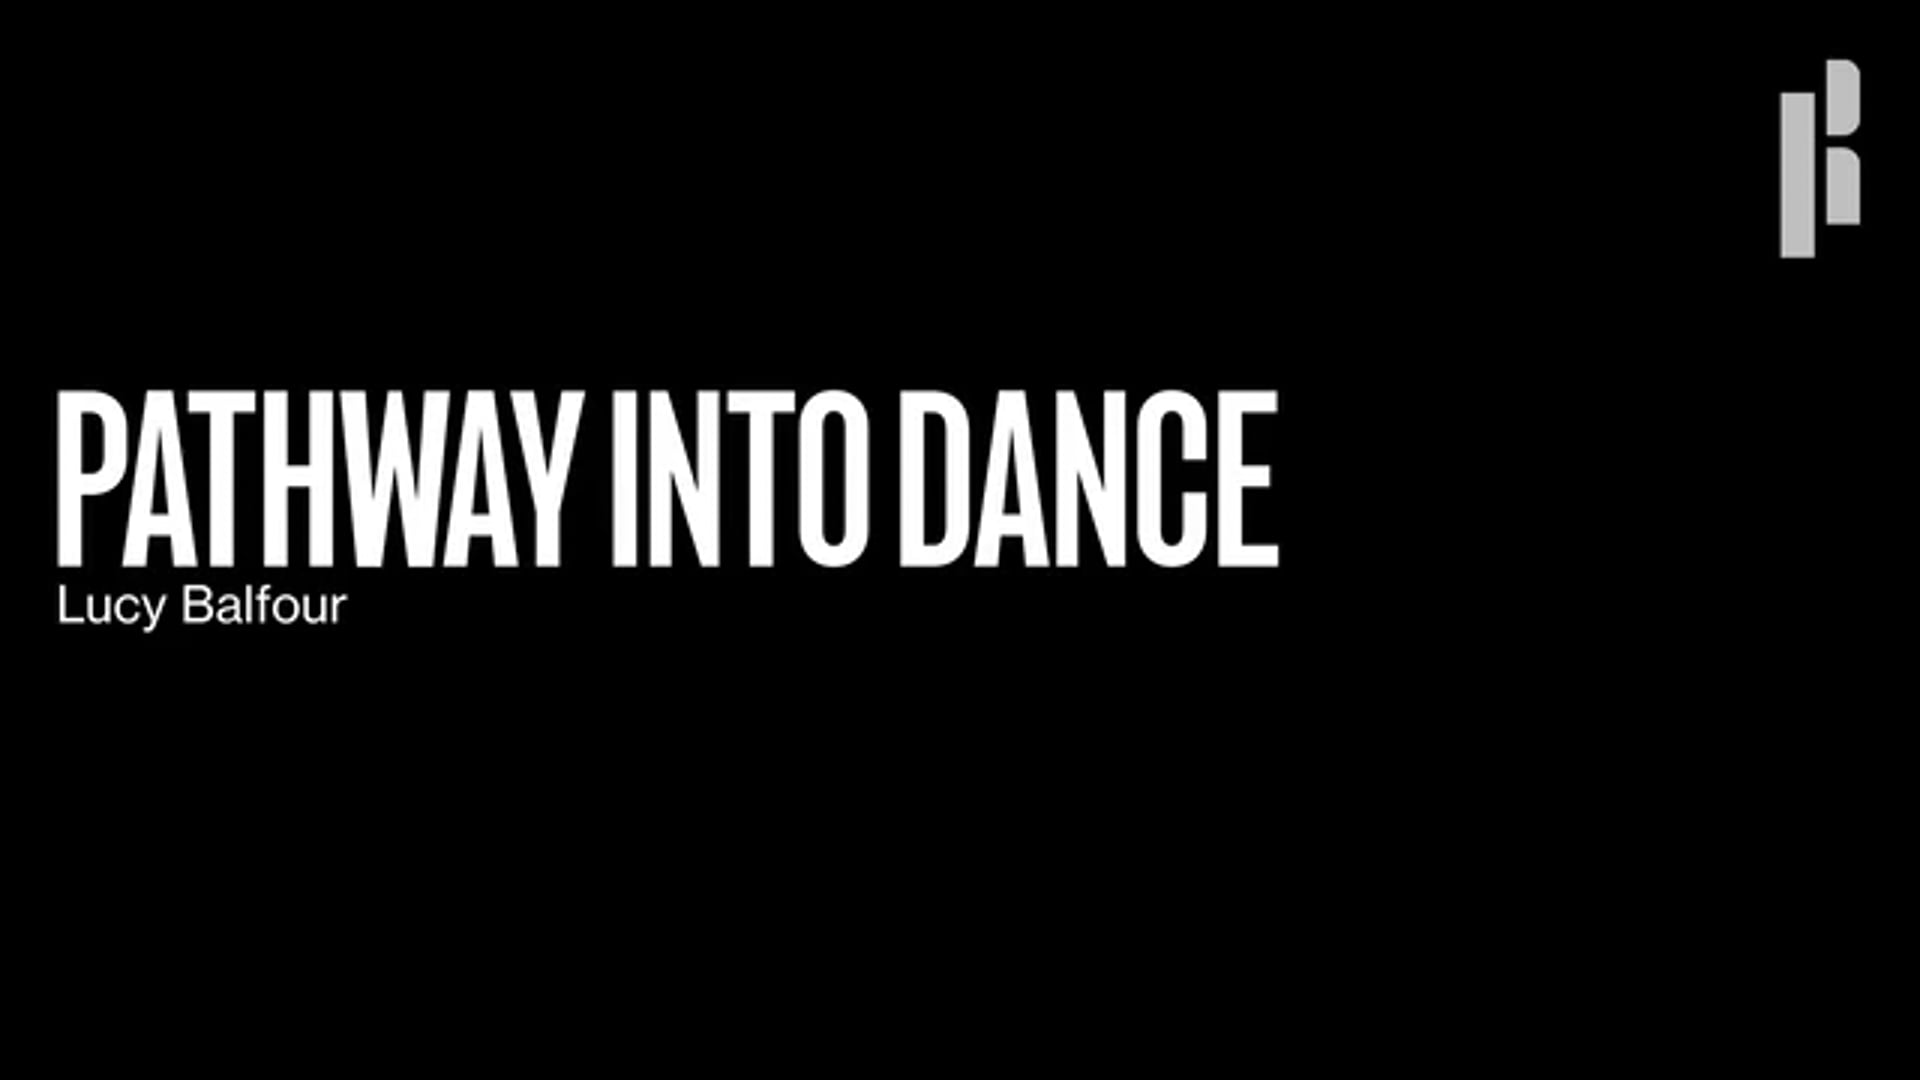 The cover of pathway into dance.